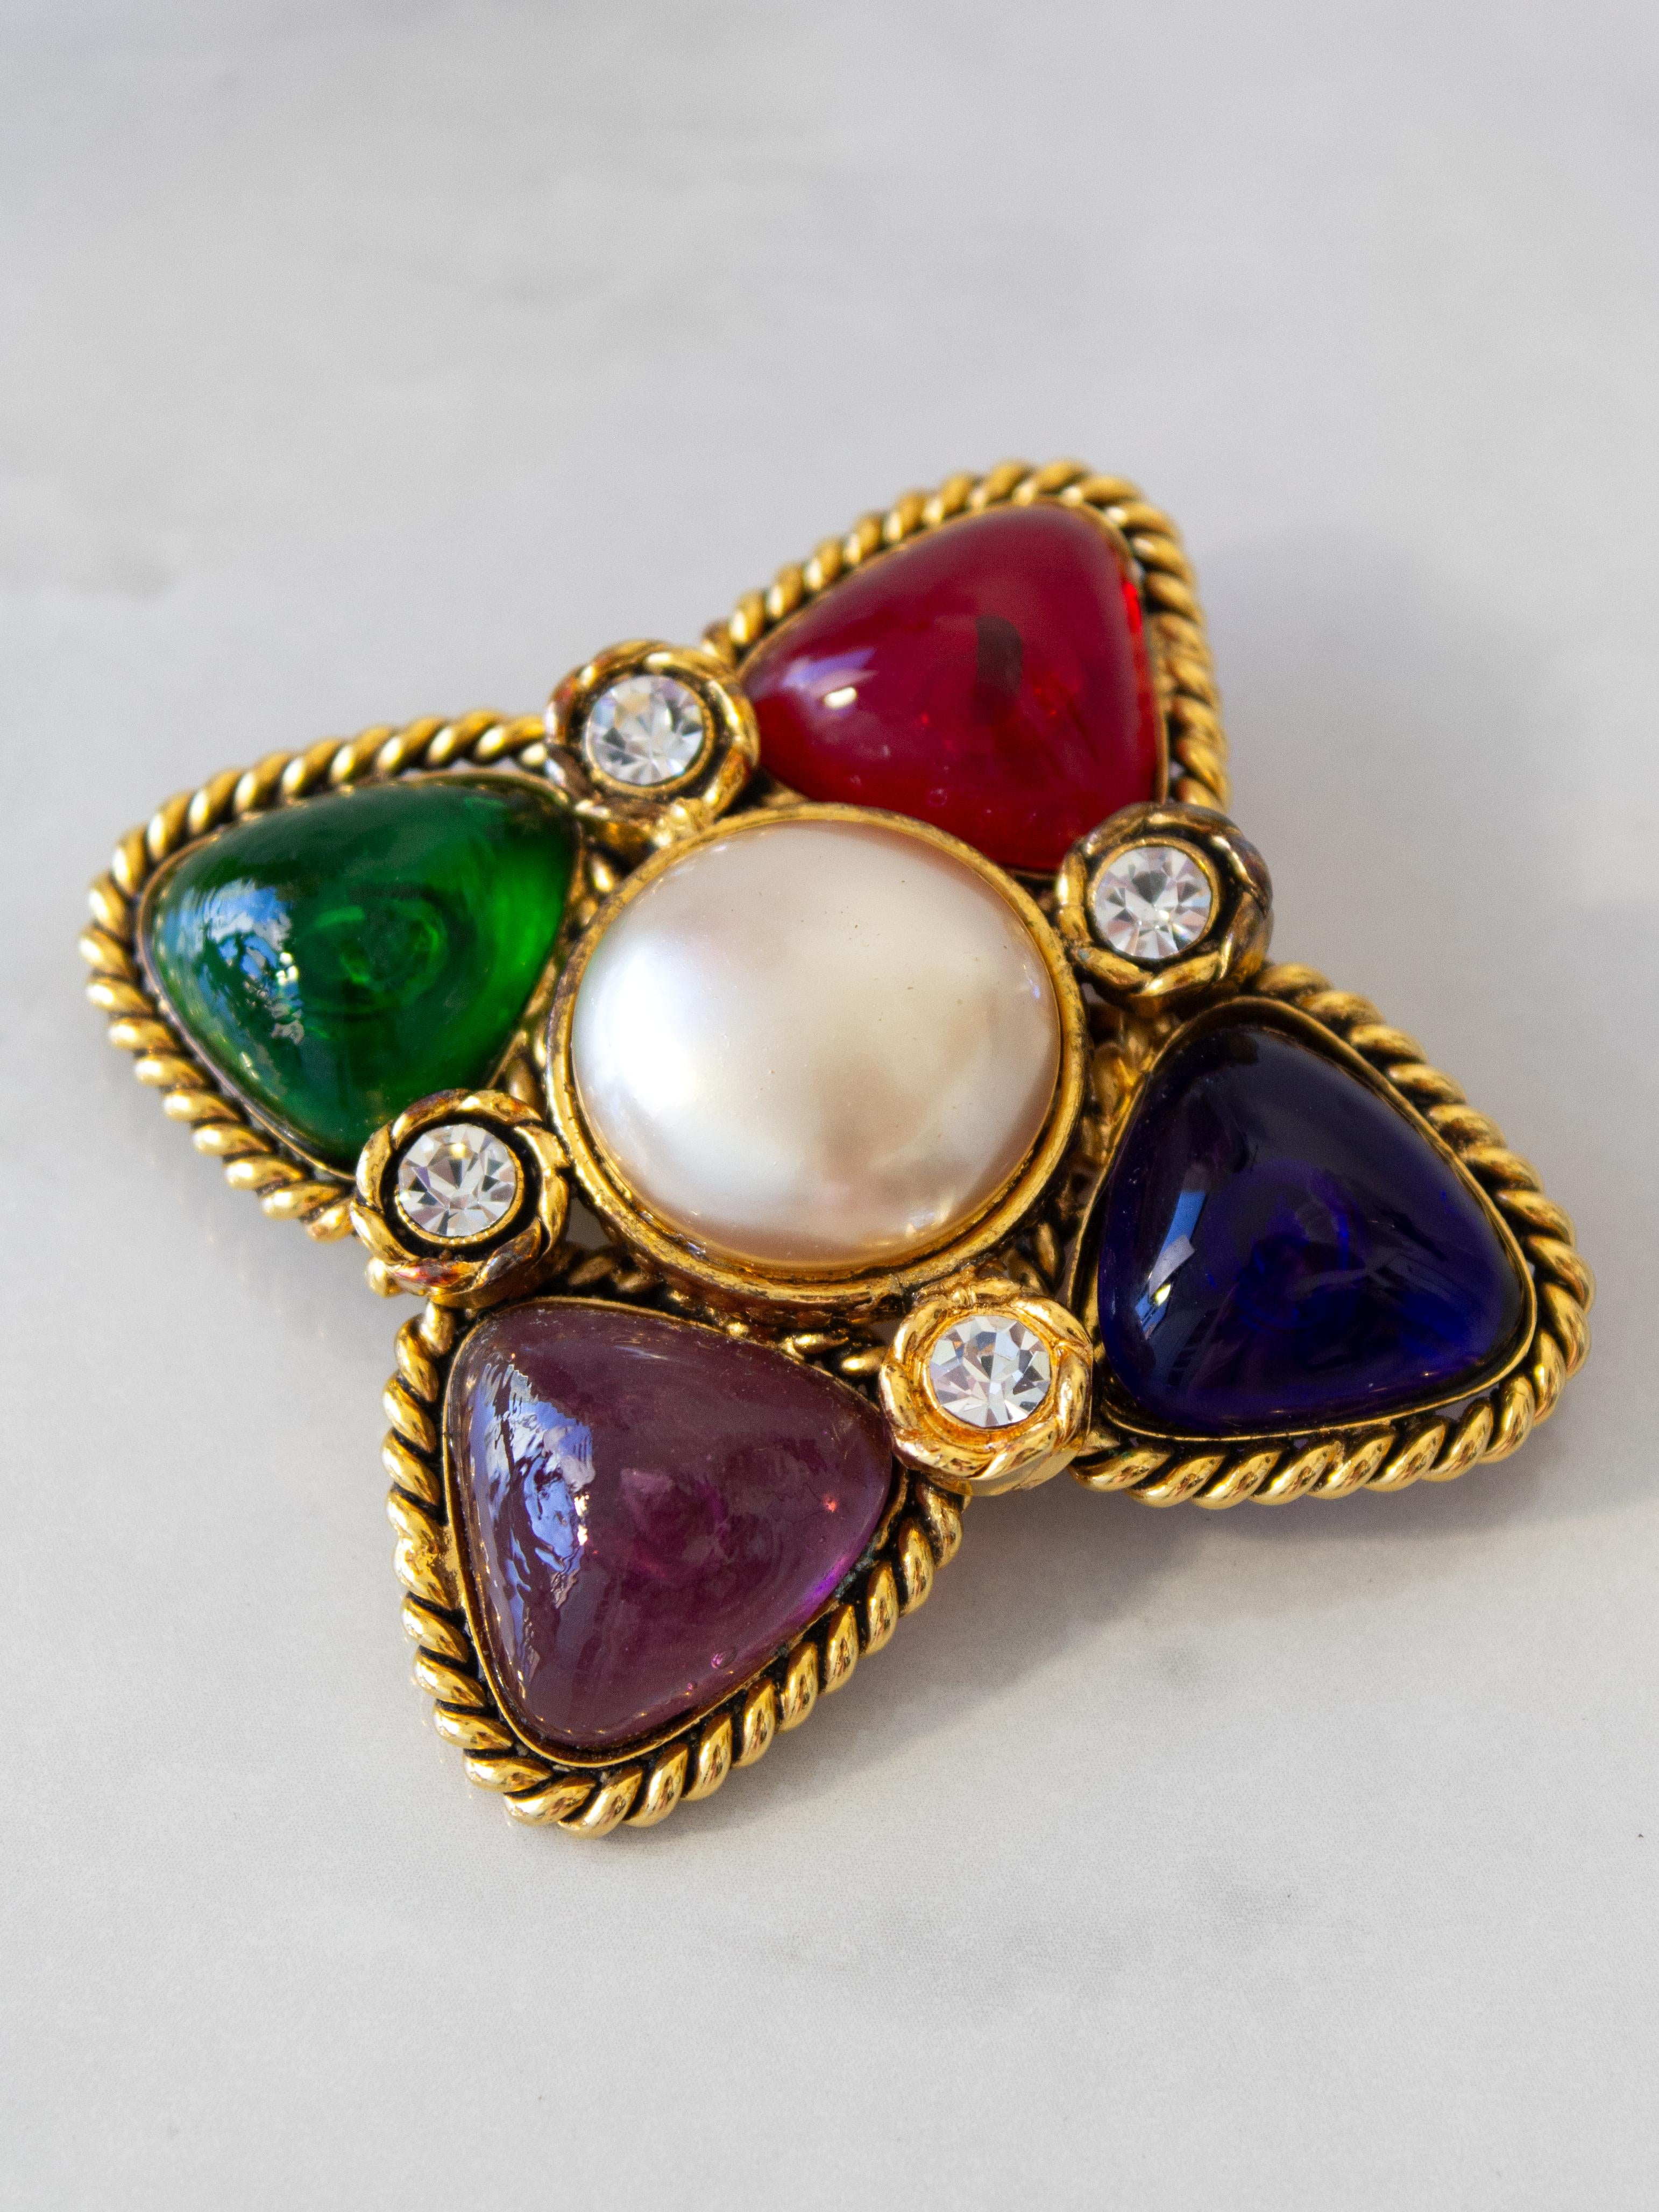 This exquisite vintage Chanel brooch from collection 23 exudes timeless elegance with its gold-tone braided gilded metal and multicolored red/blue/purple/green glass paste stones. The captivating cross rhombus motif, adorned with center faux pearl,